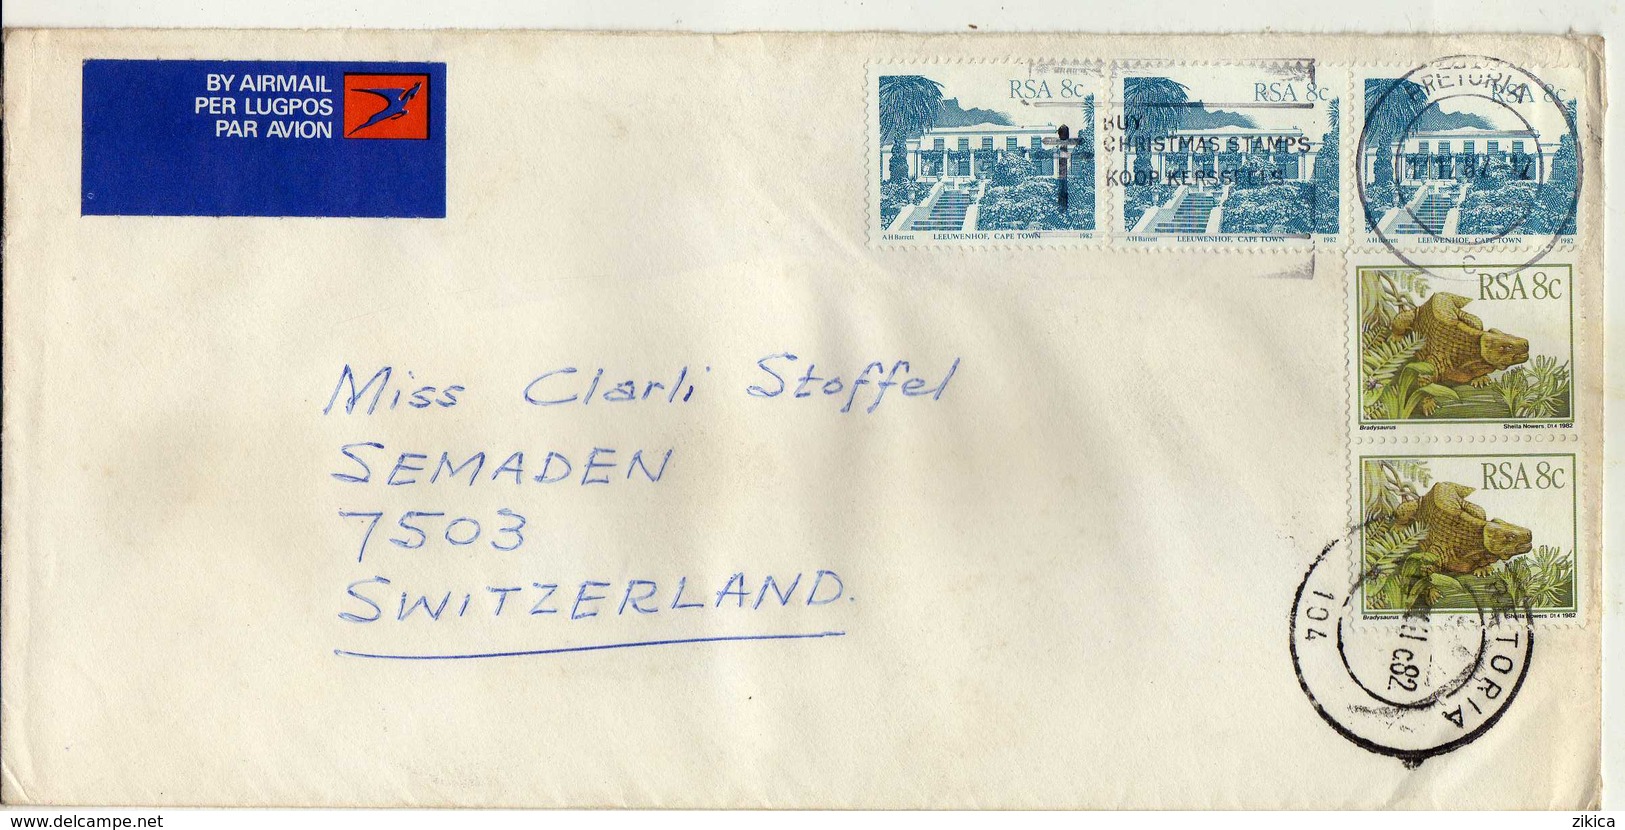 South Africa Letter Via Switzerland 1982.Air Mail Label.stamps Motive - South African Architecture And Dinosaurs - Covers & Documents